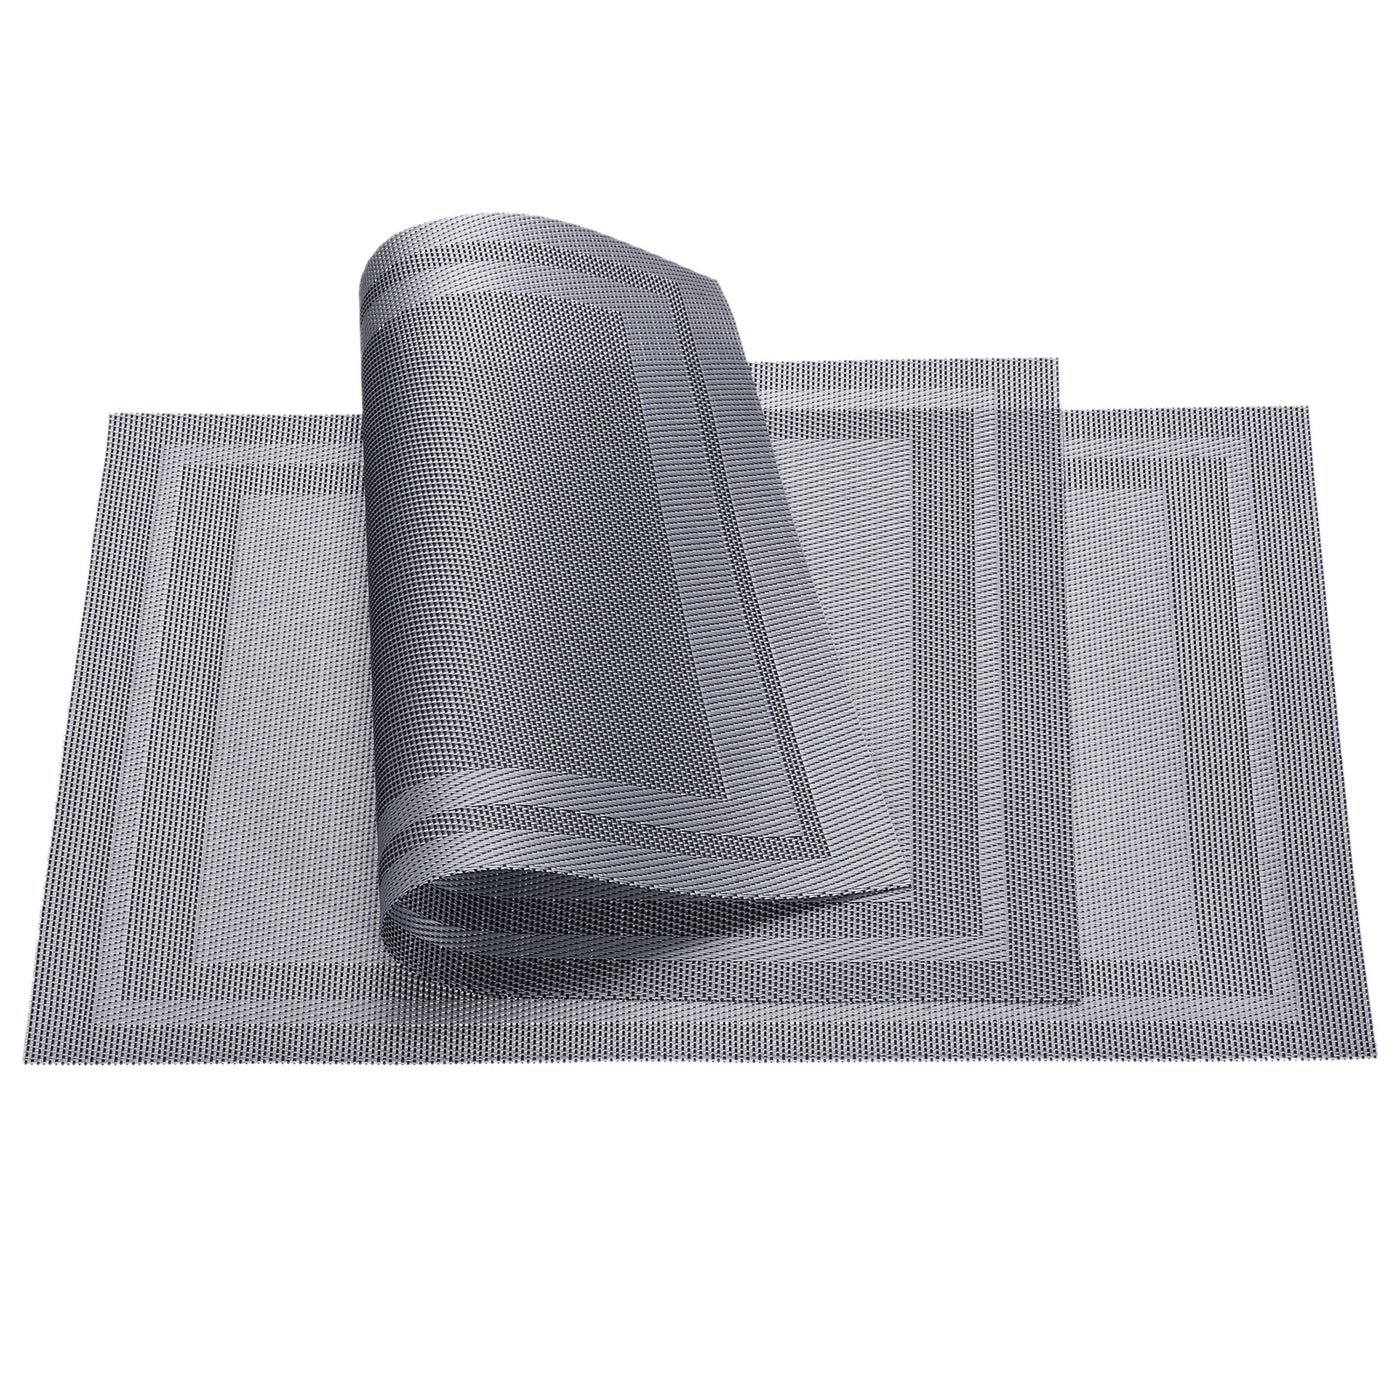 uxcell Uxcell Place Mats 450x300mm 8pcs PVC Table Washable Woven Placemat, Gray